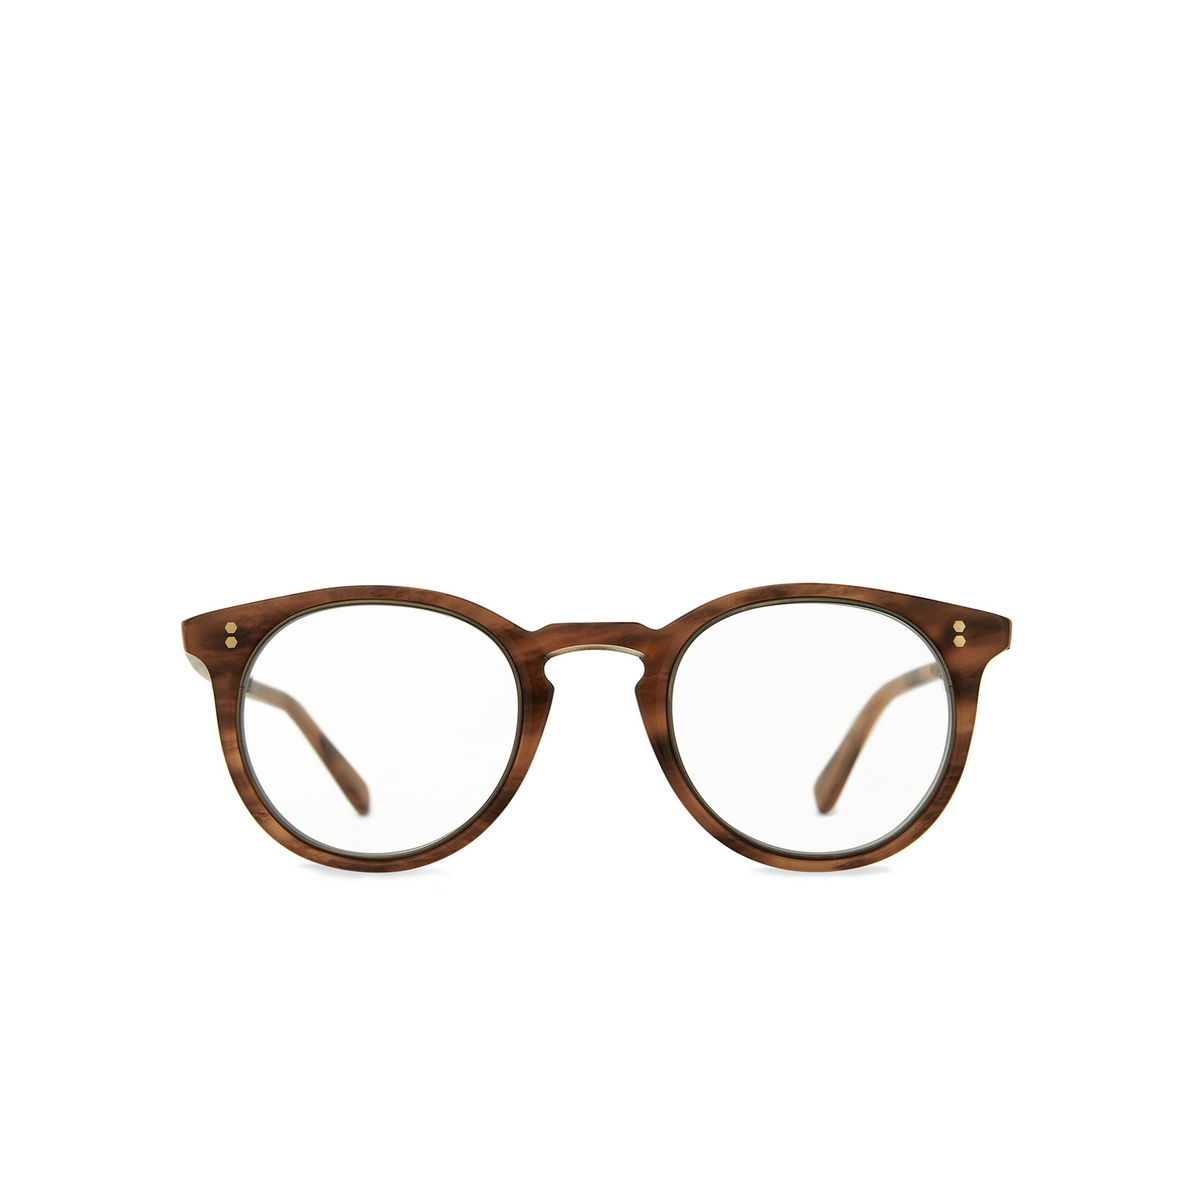 Mr. Leight® Round Eyeglasses: Crosby C color Patchouli - Antique Gold Pat-atg - front view.